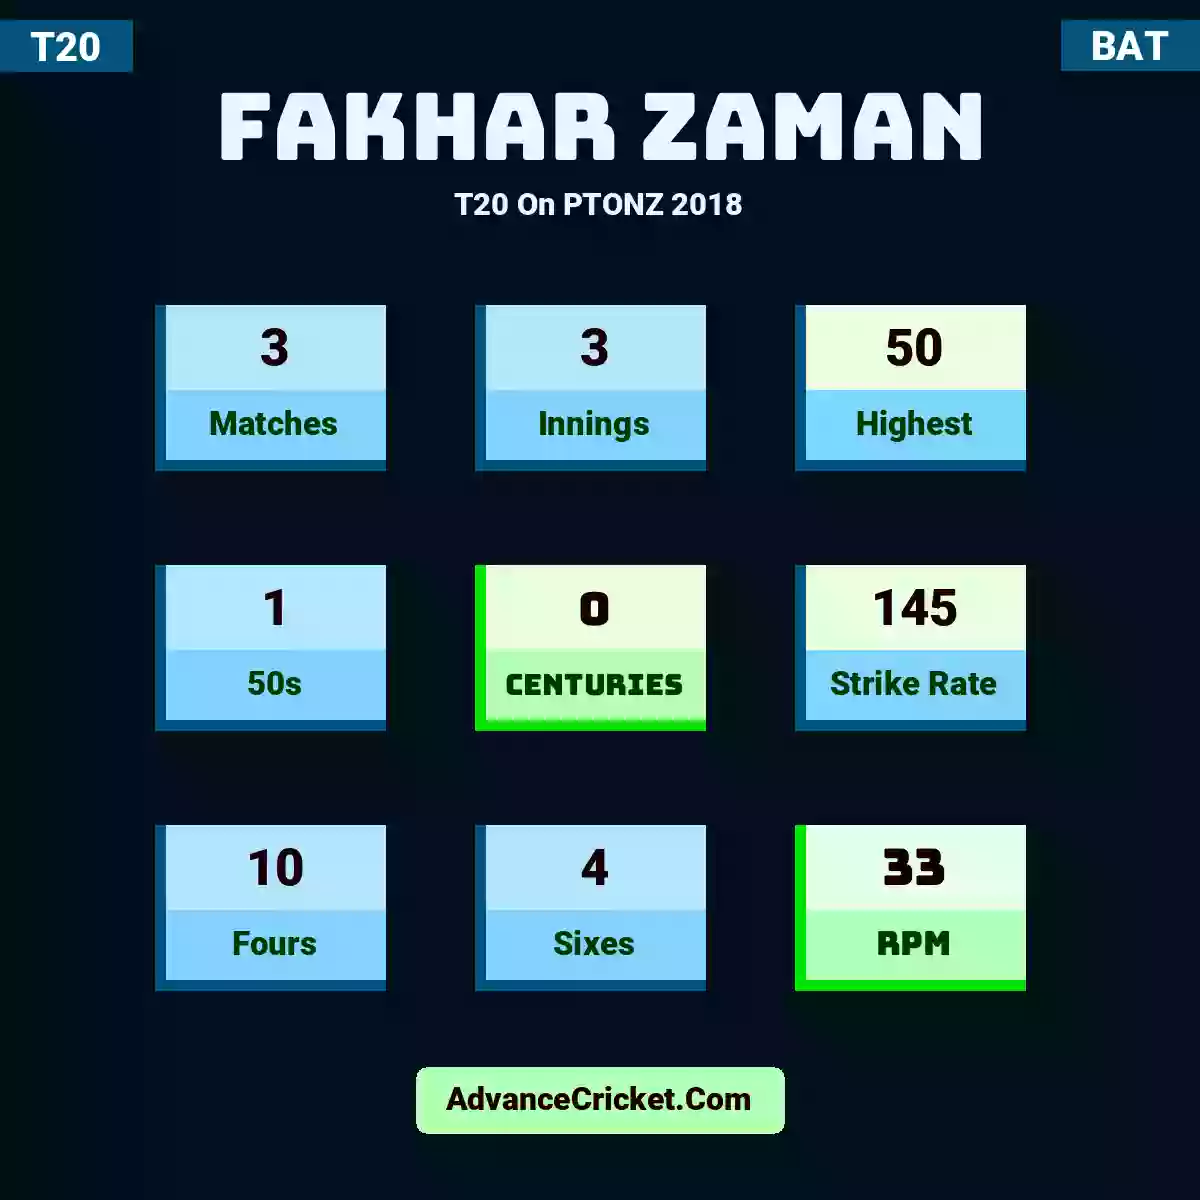 Fakhar Zaman T20  On PTONZ 2018, Fakhar Zaman played 3 matches, scored 50 runs as highest, 1 half-centuries, and 0 centuries, with a strike rate of 145. F.Zaman hit 10 fours and 4 sixes, with an RPM of 33.